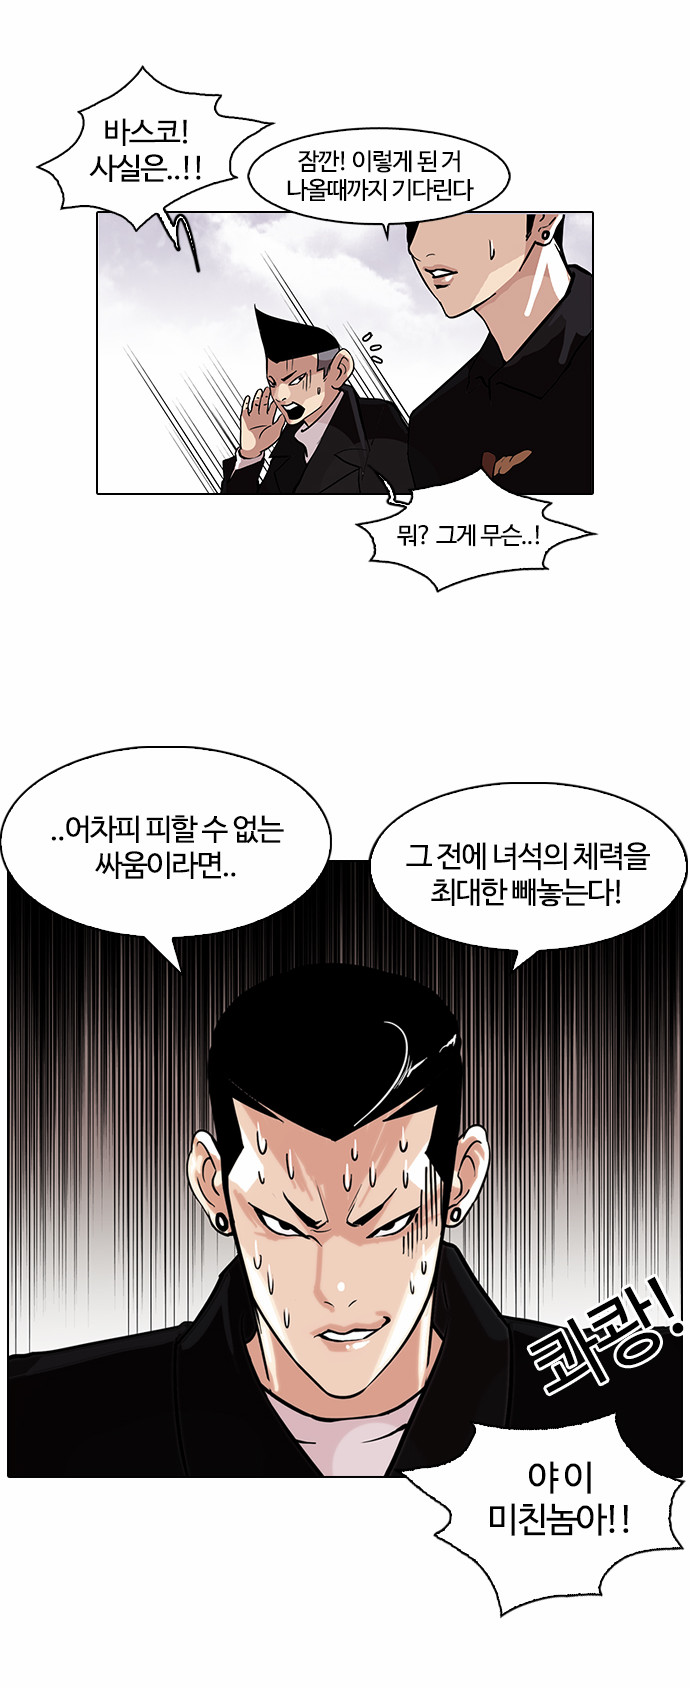 Lookism - Chapter 82 - Page 2